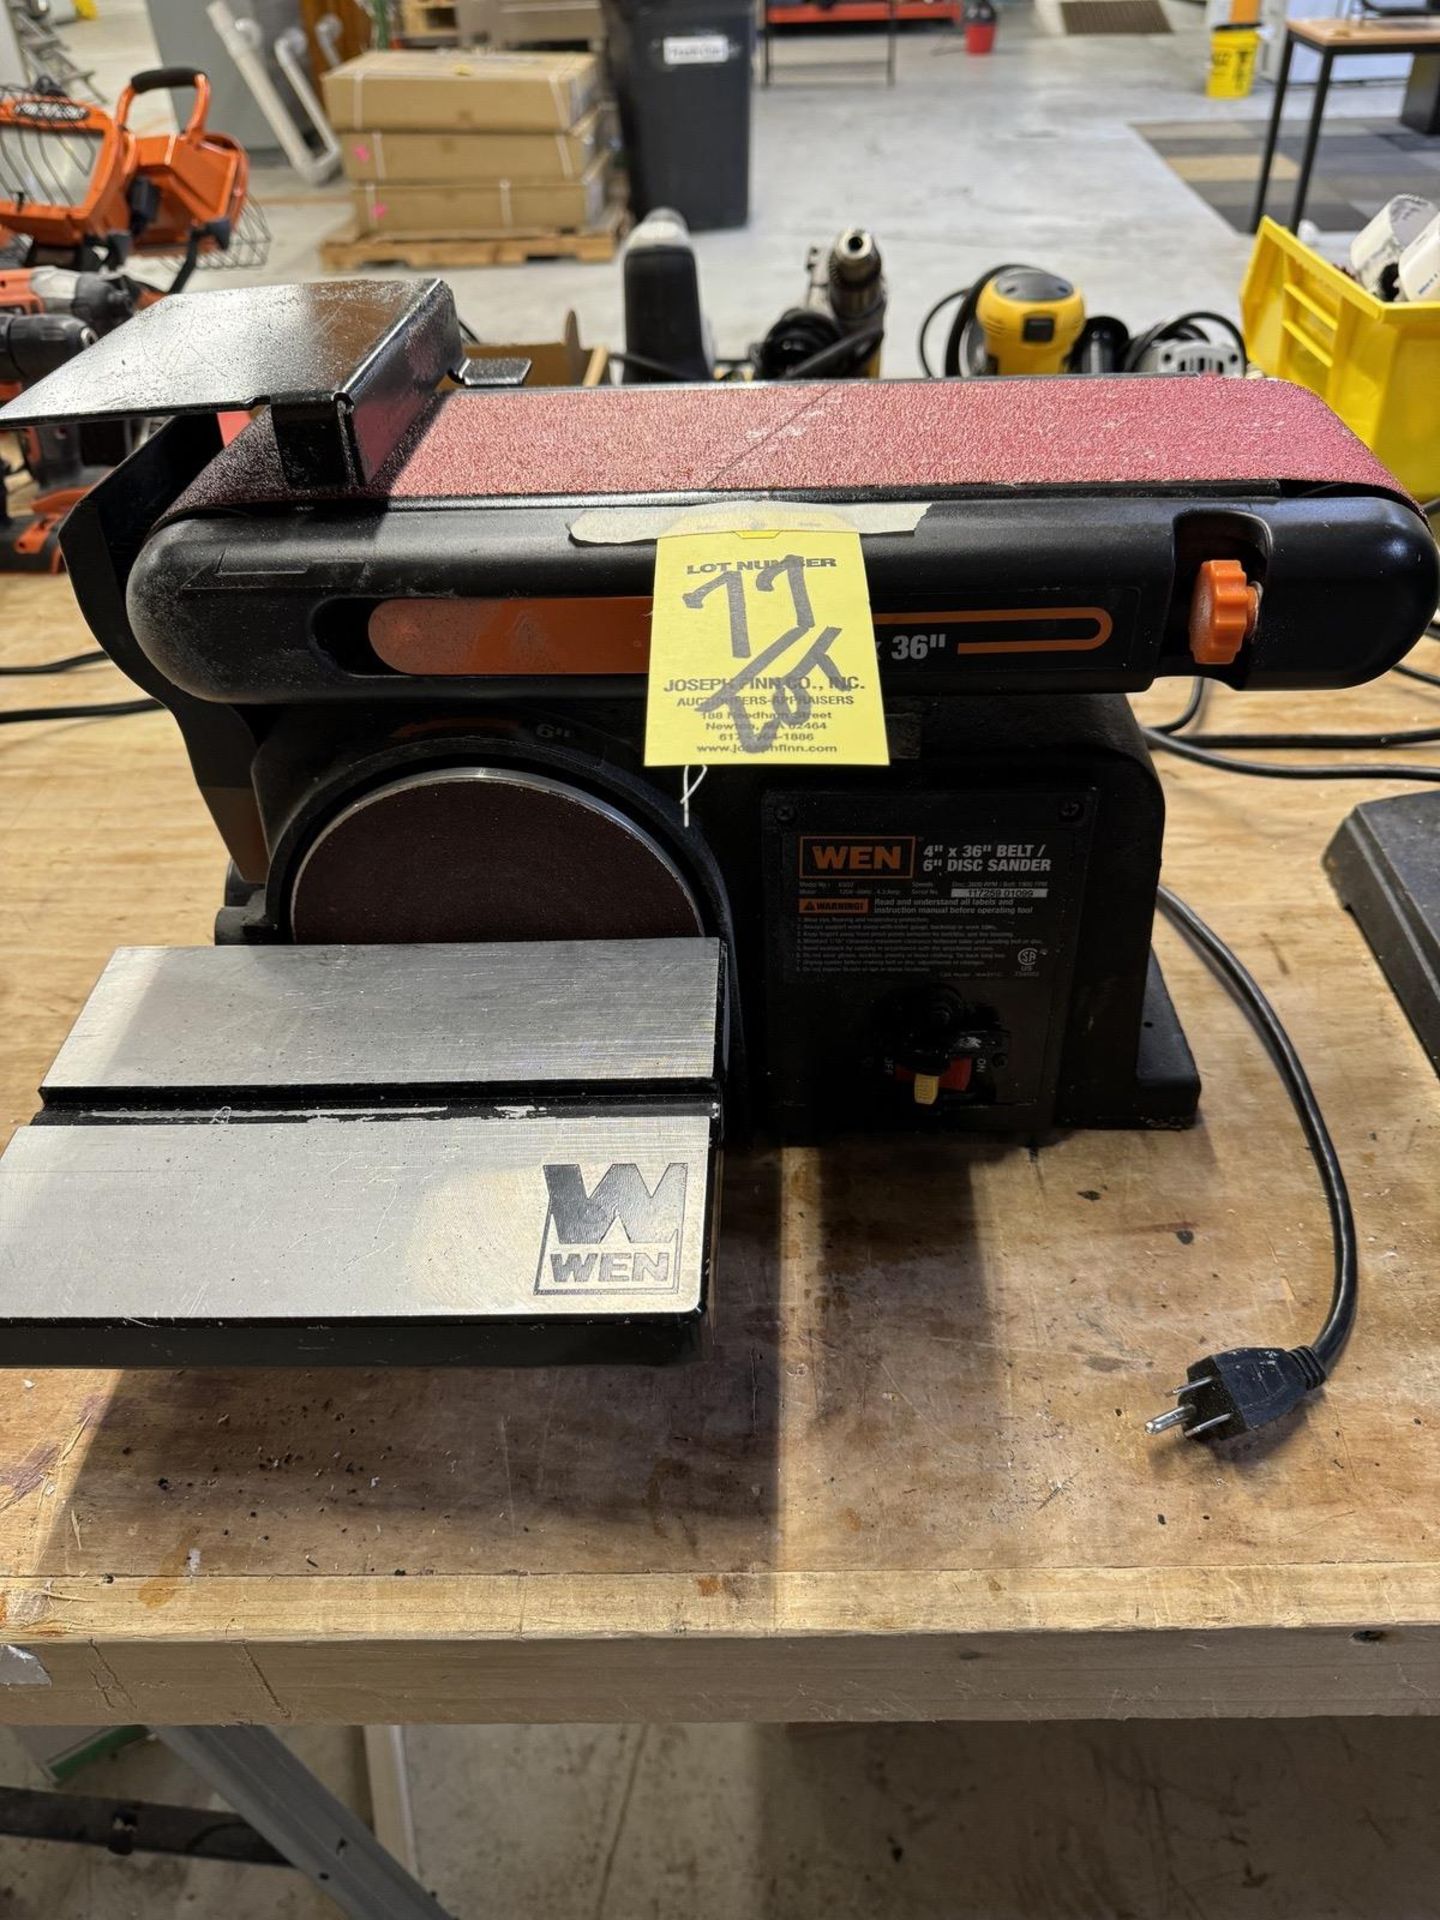 Lot WEN 4" x 36" Belt-6" Disc Sander, Skil 3320 10" Bench Drill, Bosch RA1181 Routing Table - Image 2 of 6